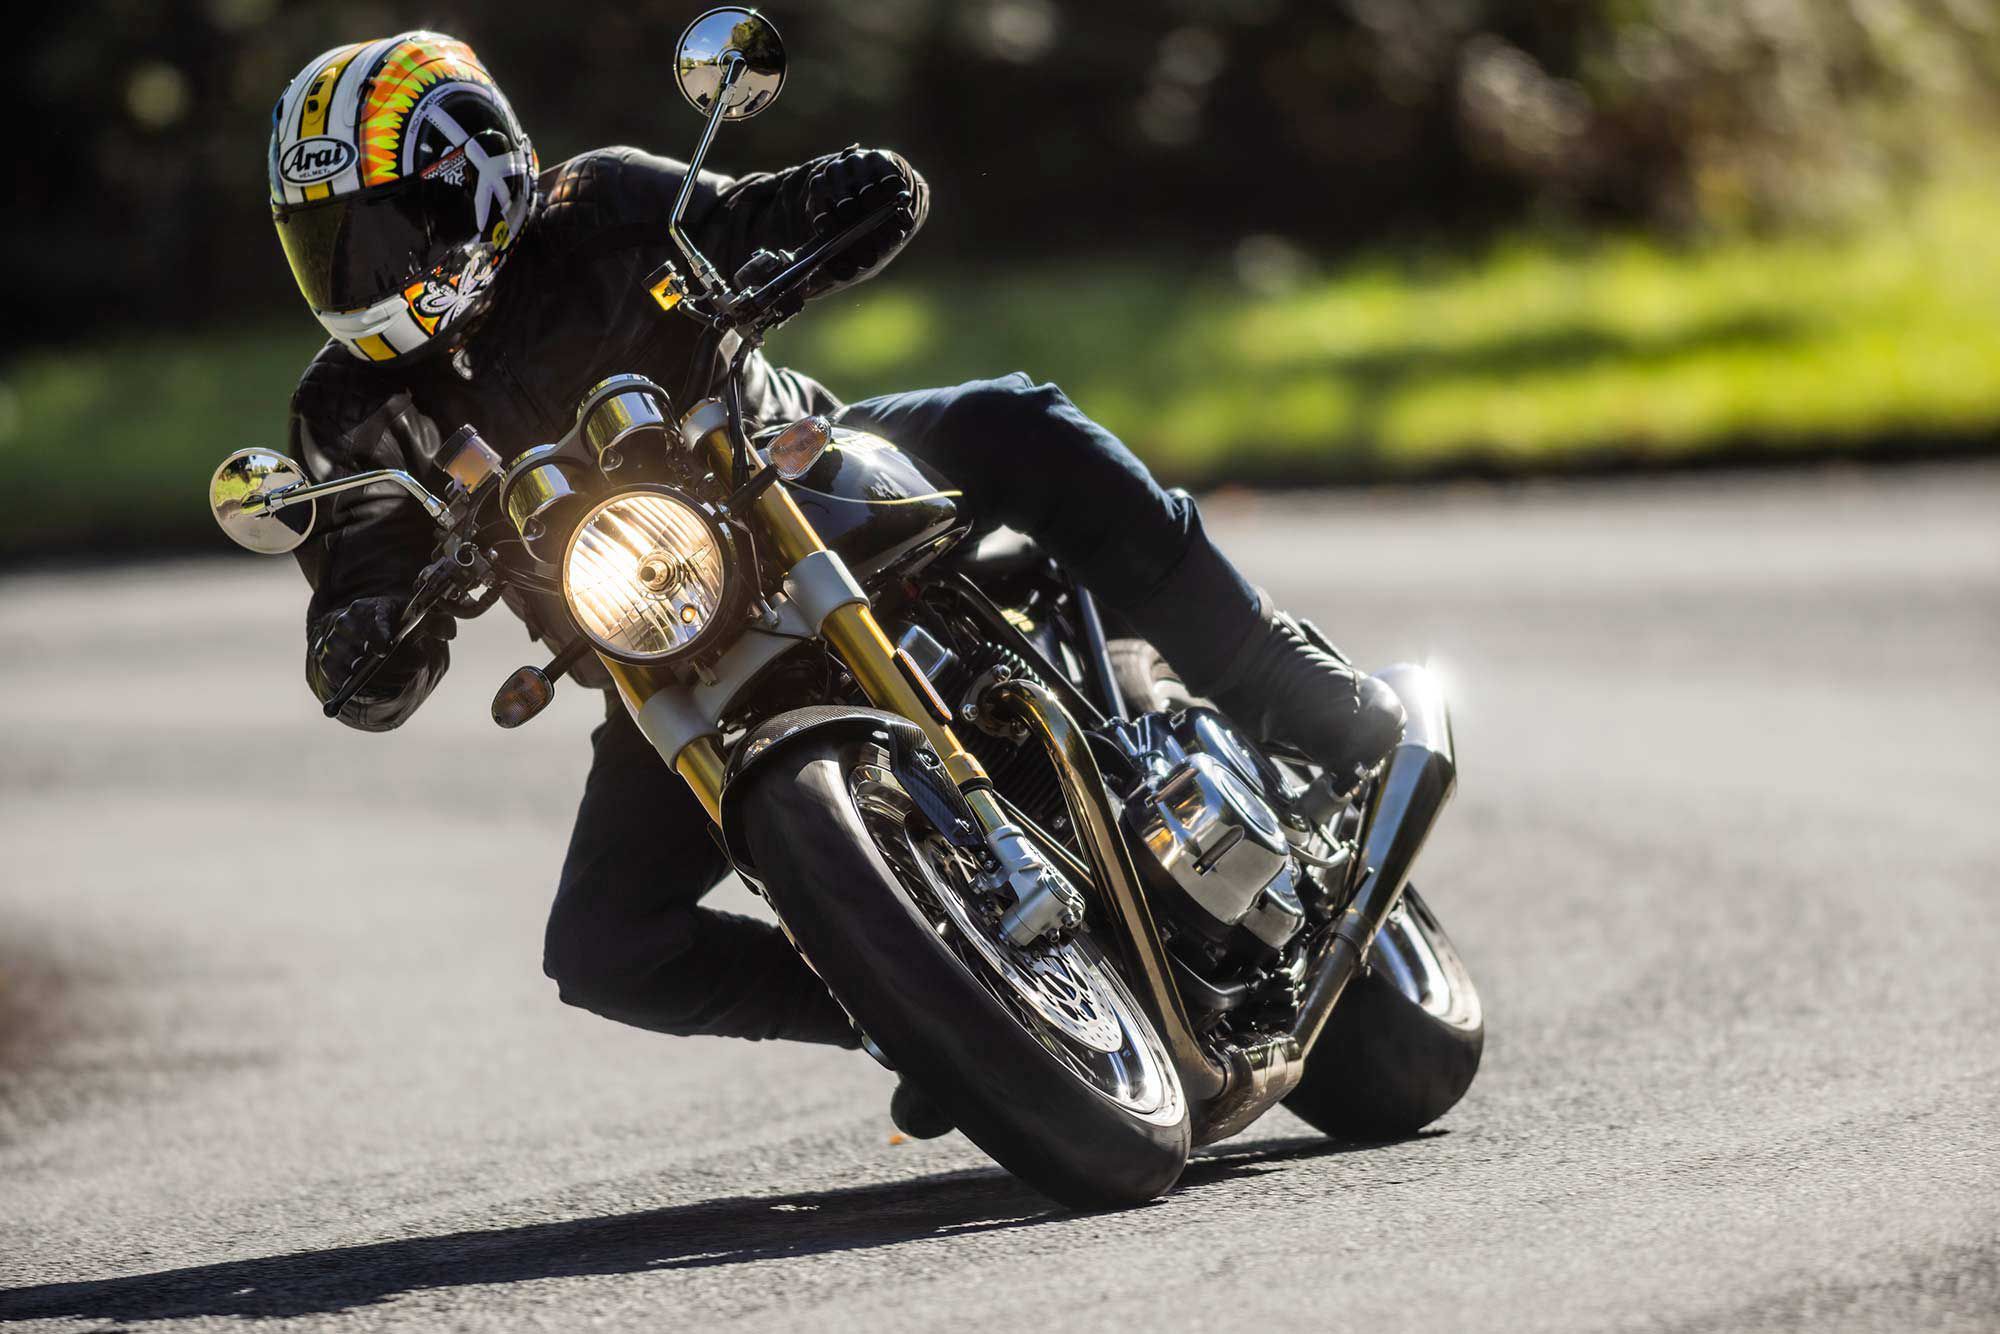 Tested in the UK, from Norton’s impressive multimillion-pound HQ.